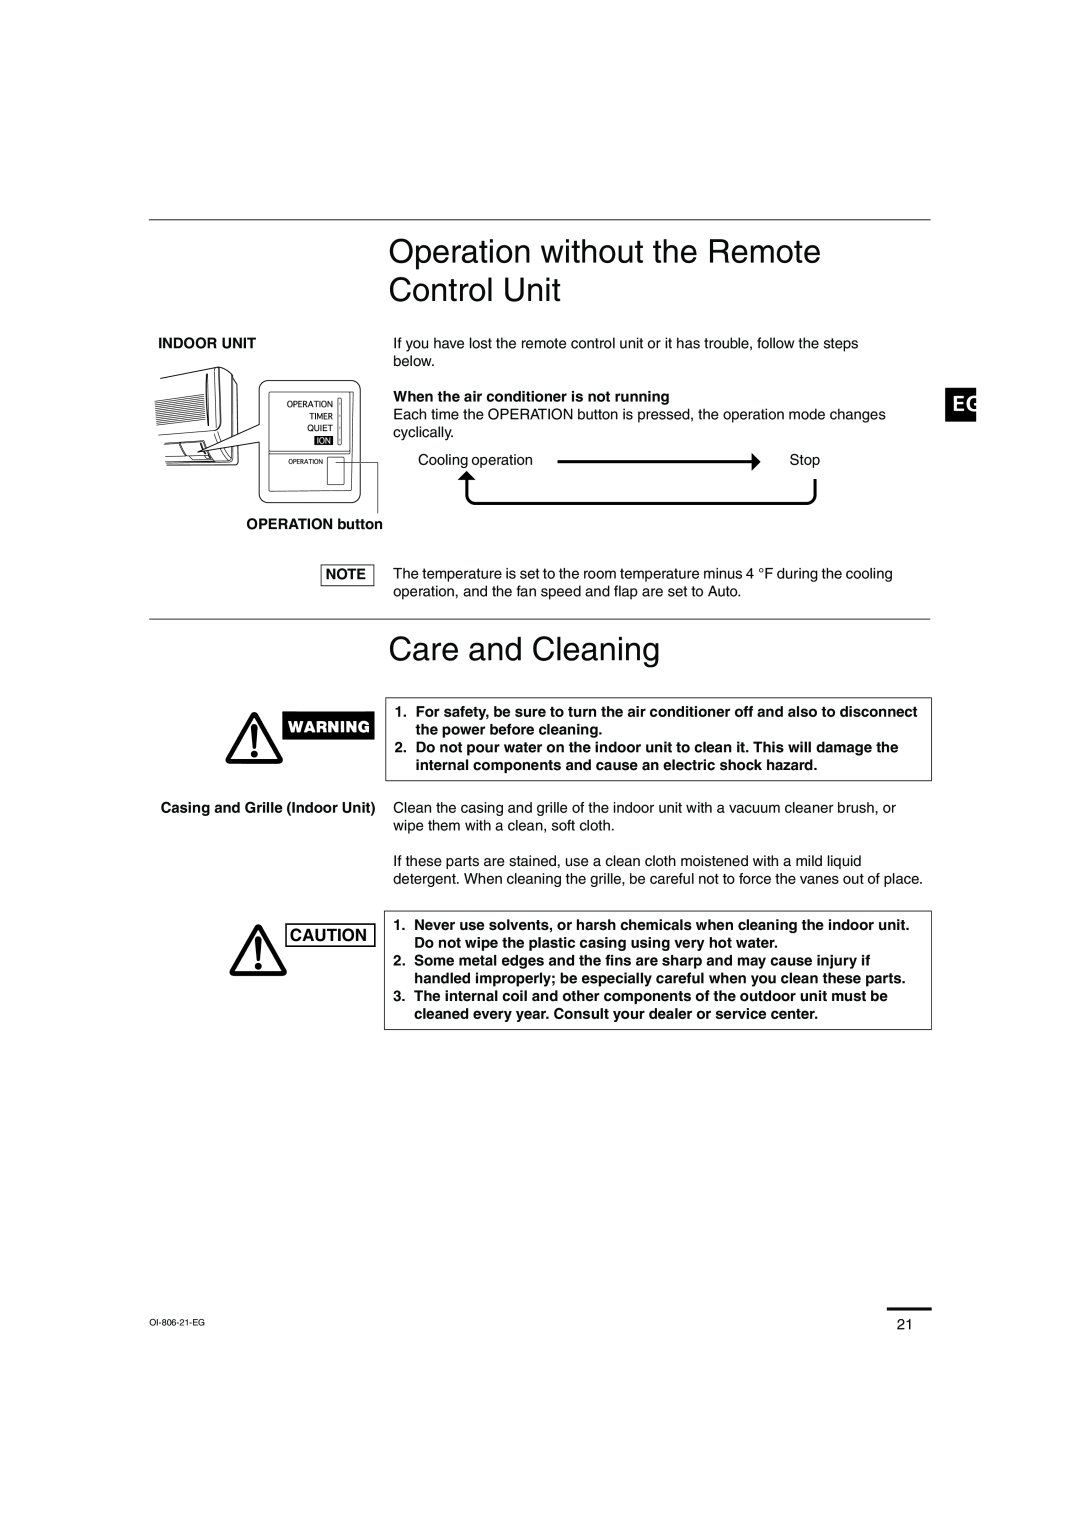 Sanyo KMS1272, KMS0972 instruction manual Operation without the Remote, Control Unit, Care and Cleaning 